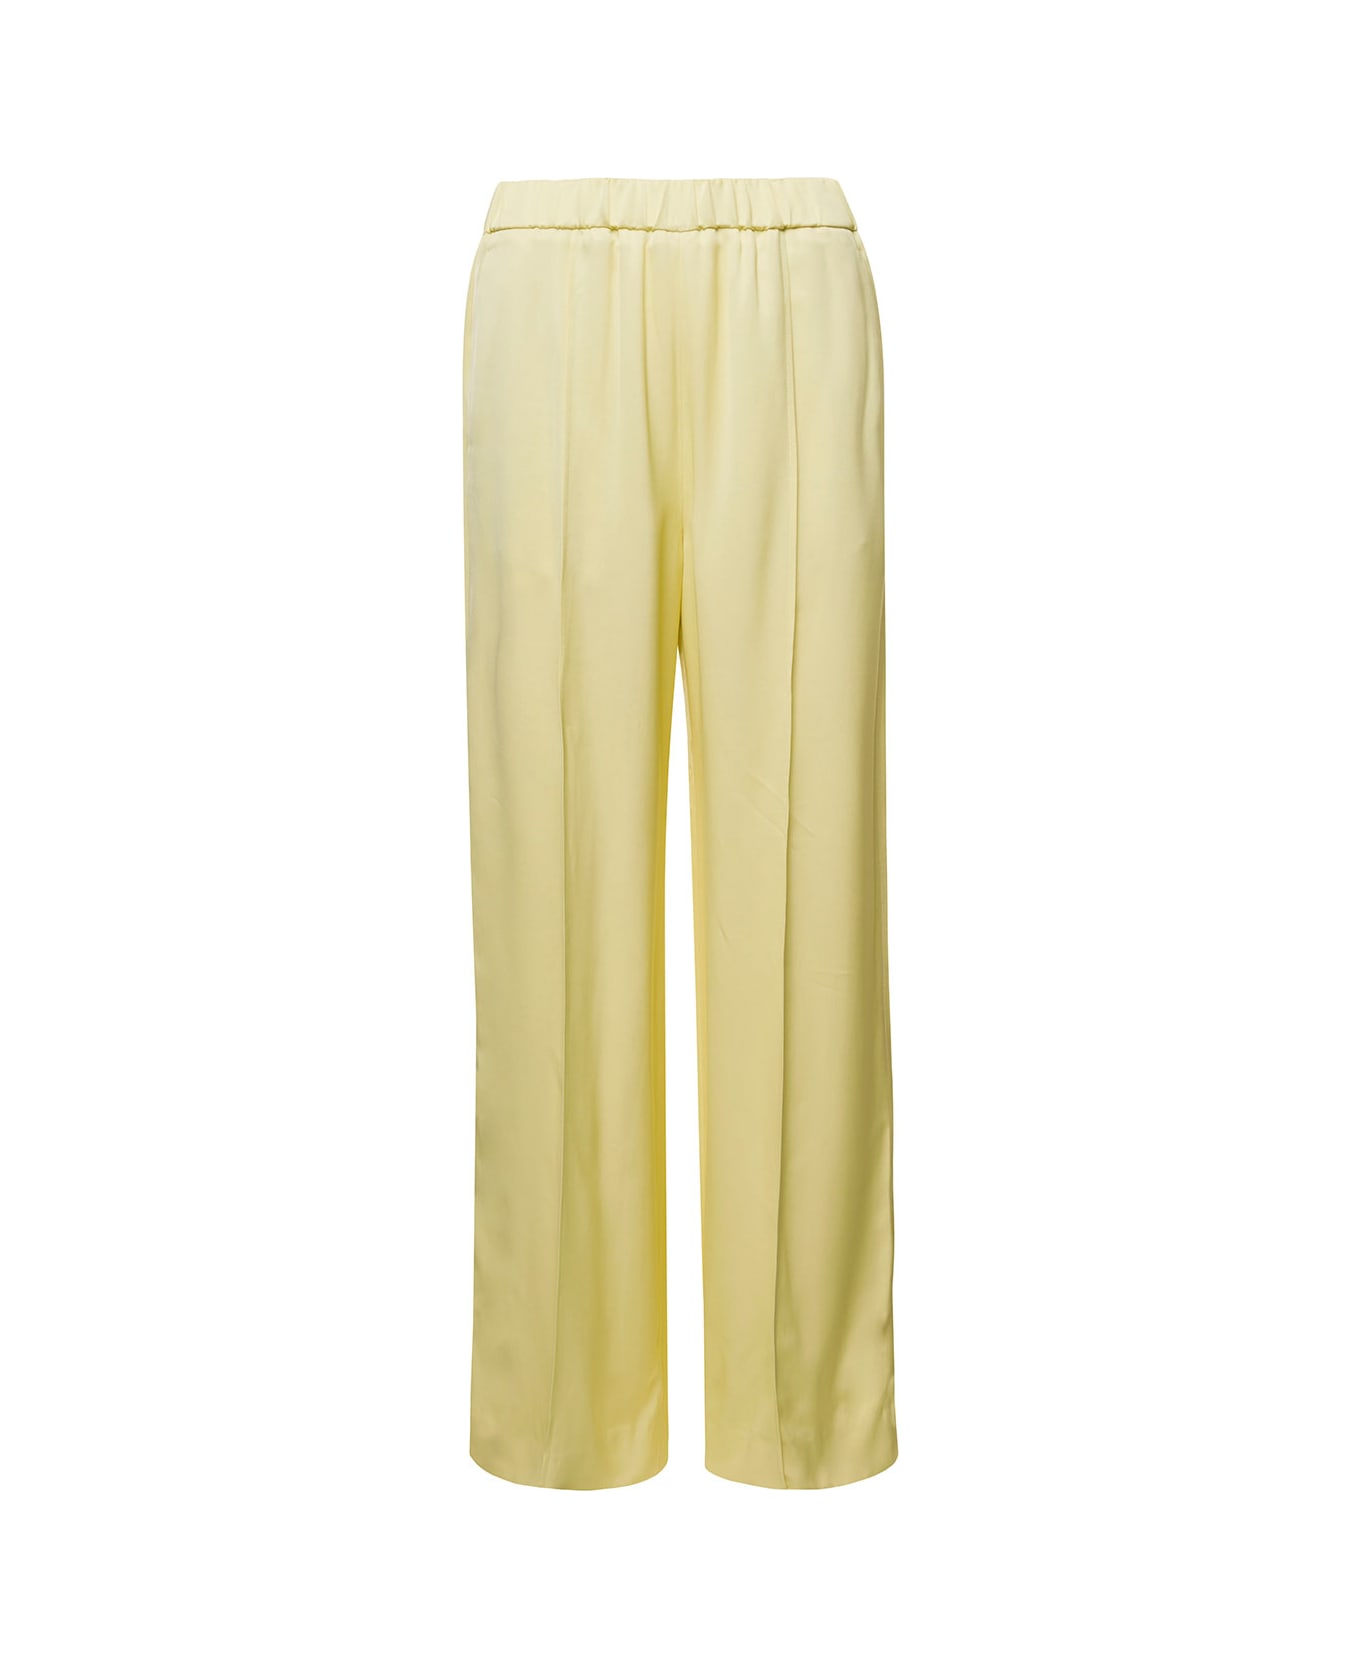 Jil Sander Yellow High Wasited Trousers In Viscose Woman - Yellow